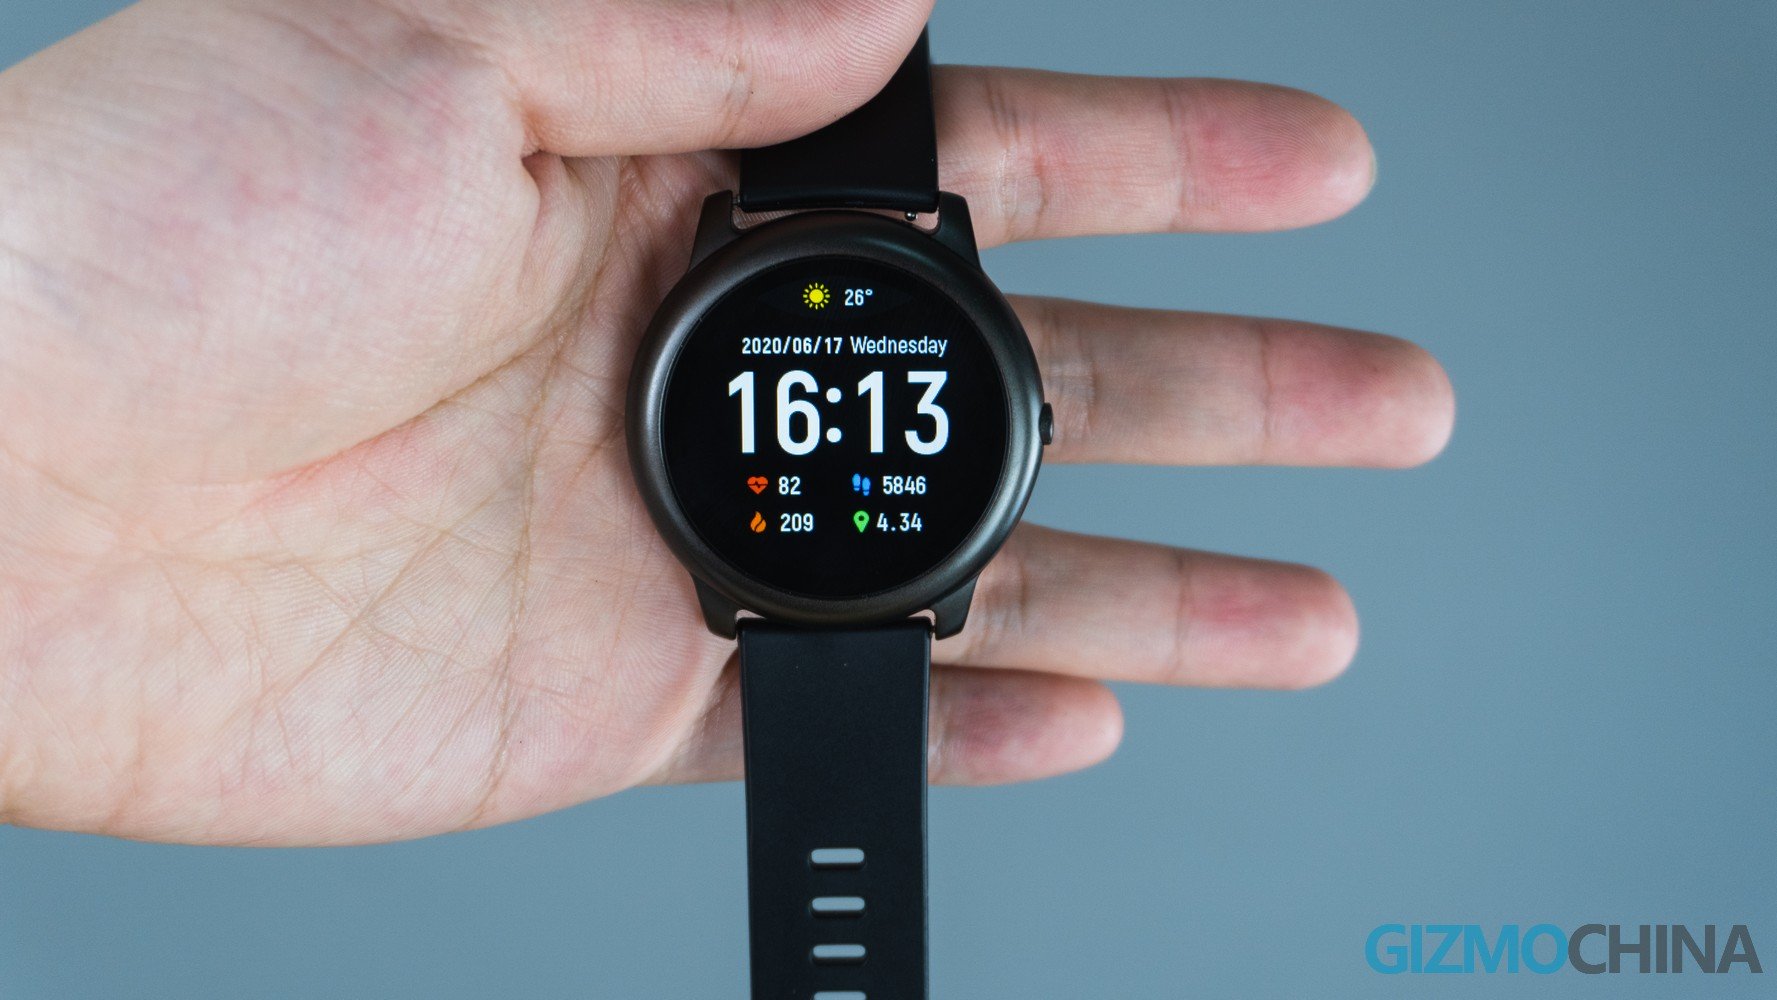 Xiaomi backed Haylou Solar Smartwatch Review: The Best Budget